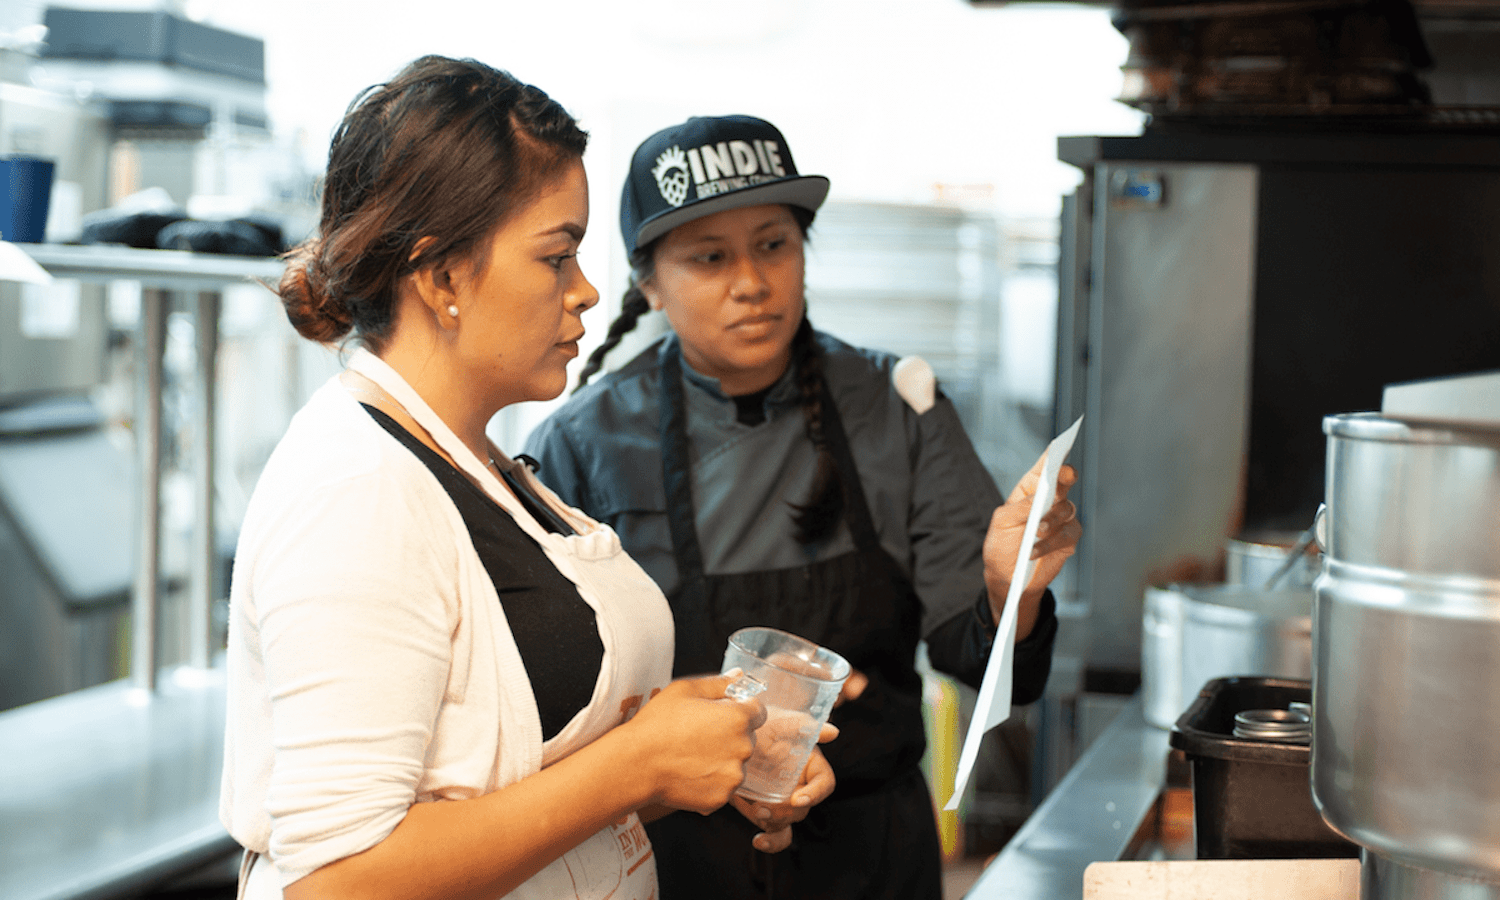 Food Shift Seeks to Expand its Impact through a New Kitchen